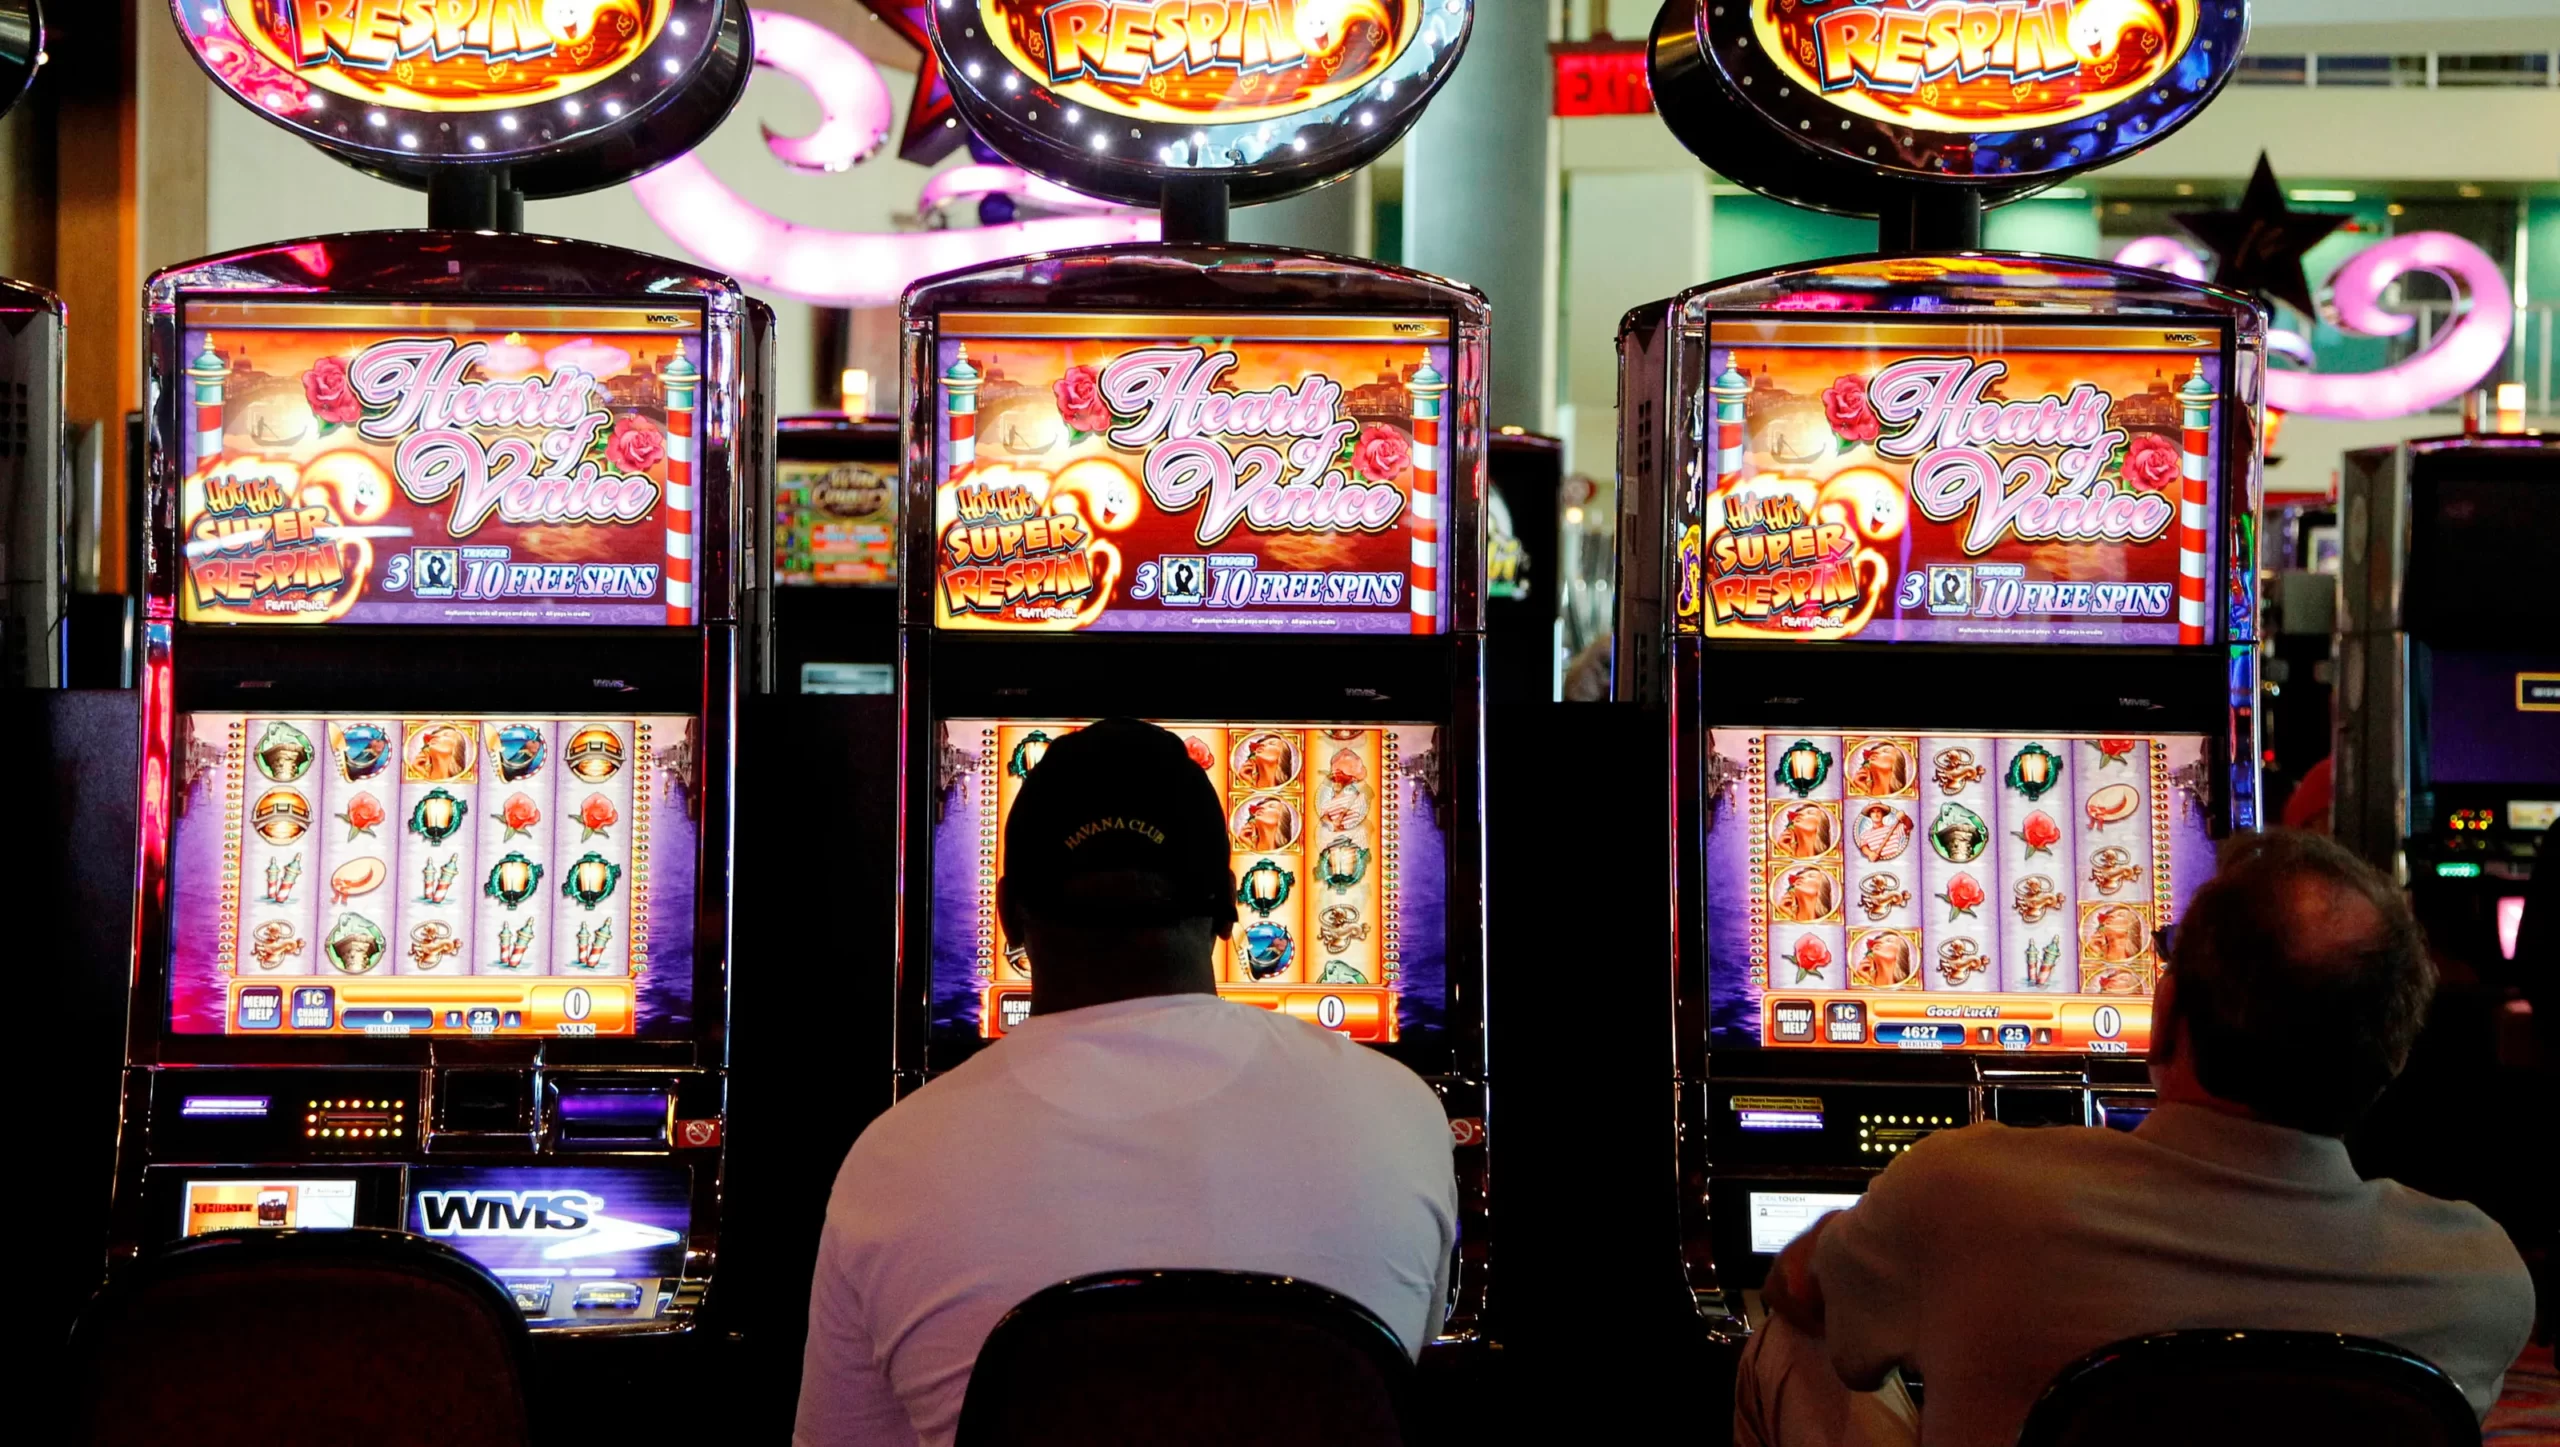 Is it better to play one slot machine or move around